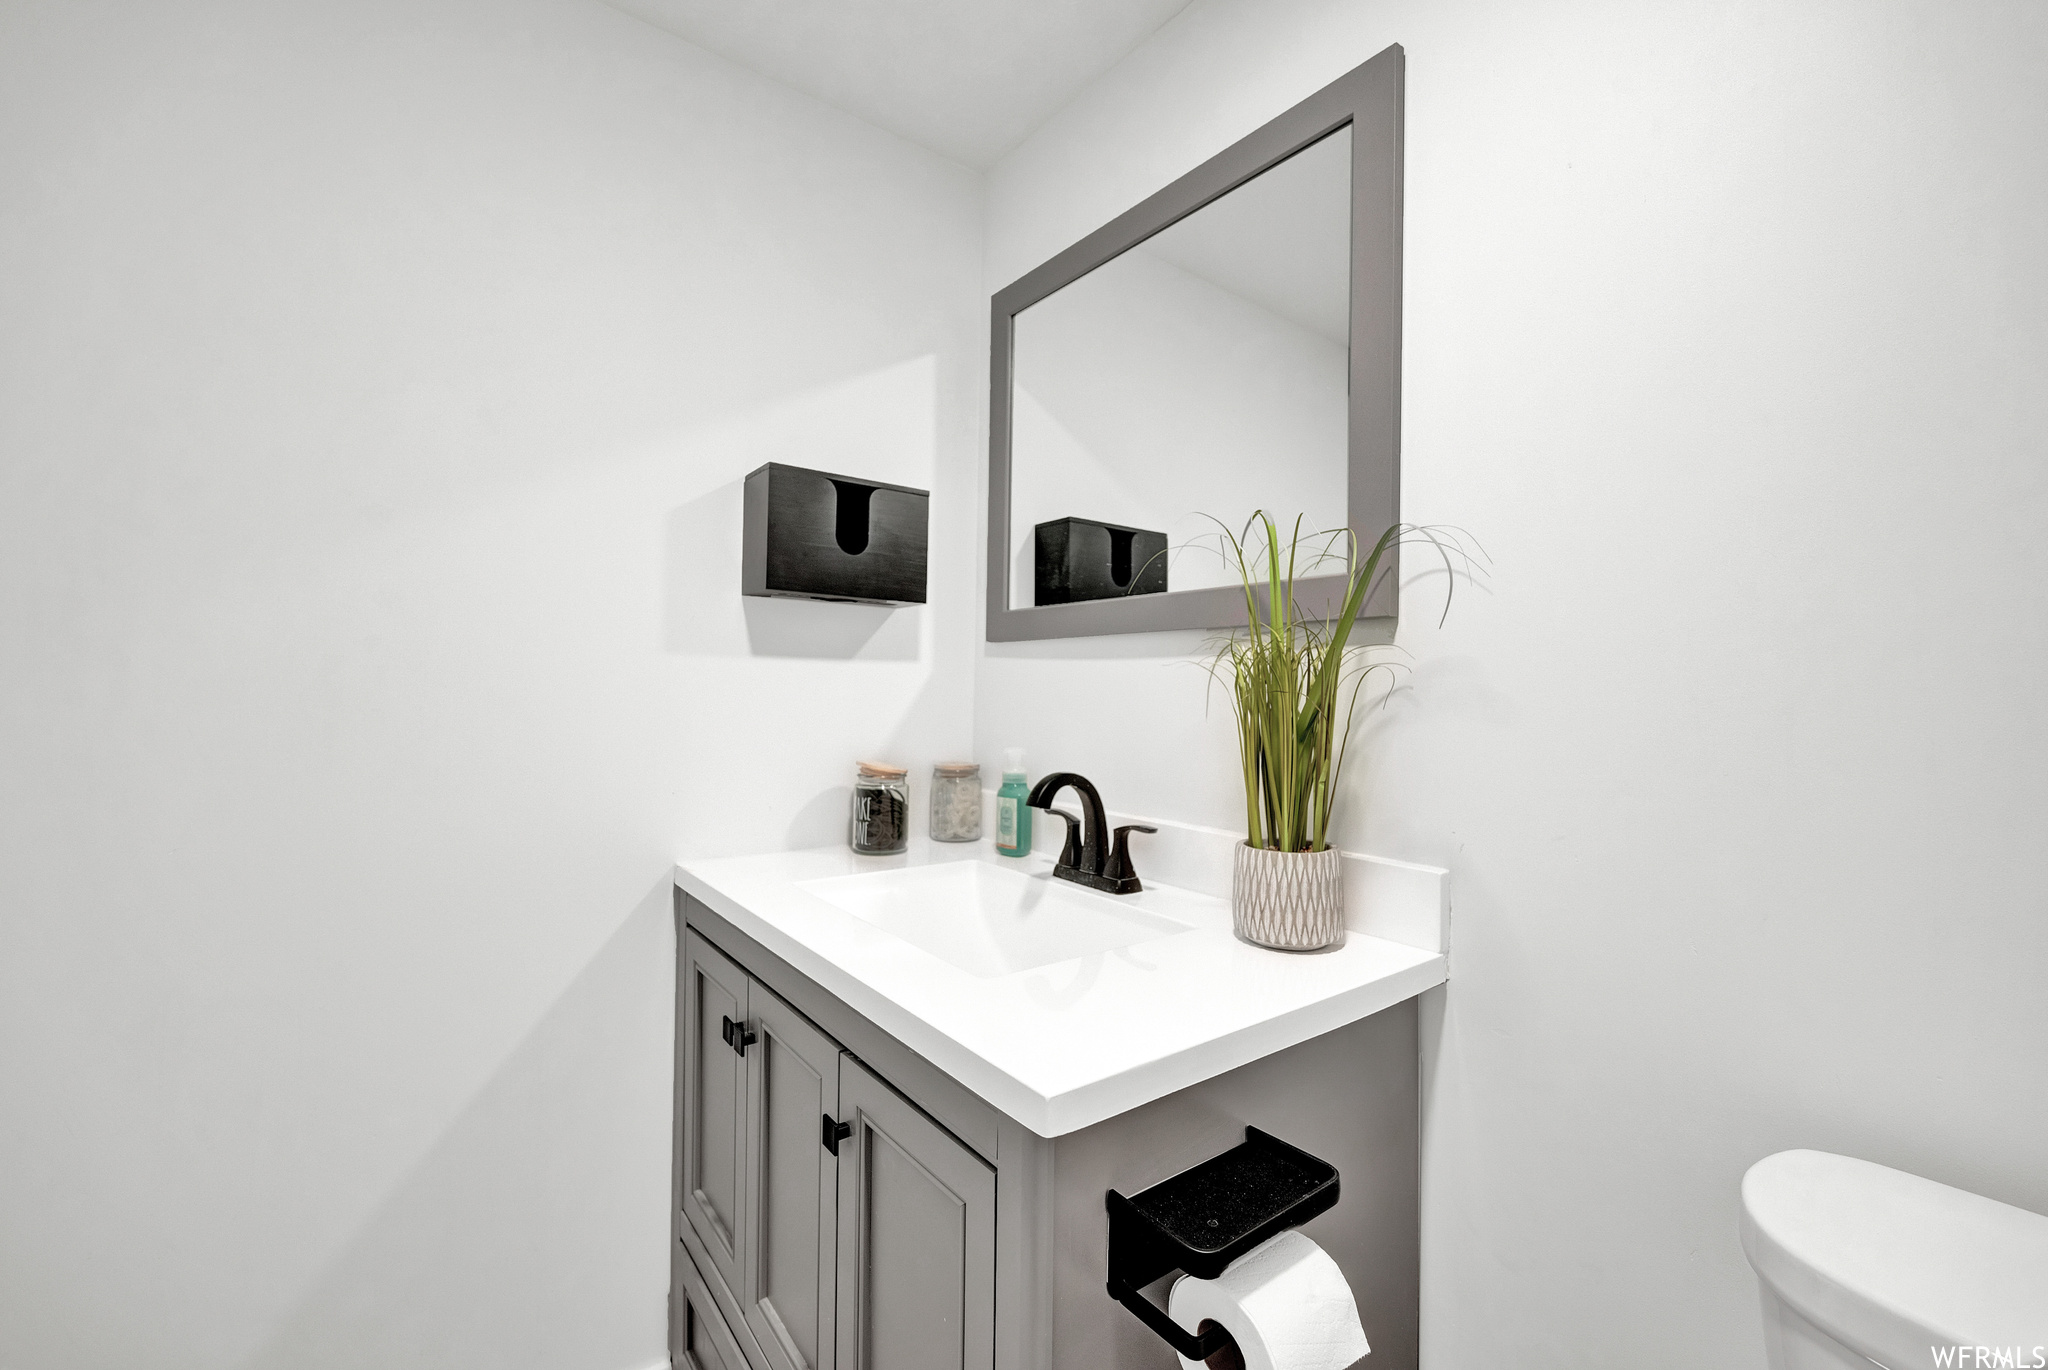 Half bath featuring vanity with extensive cabinet space, mirror, and toilet